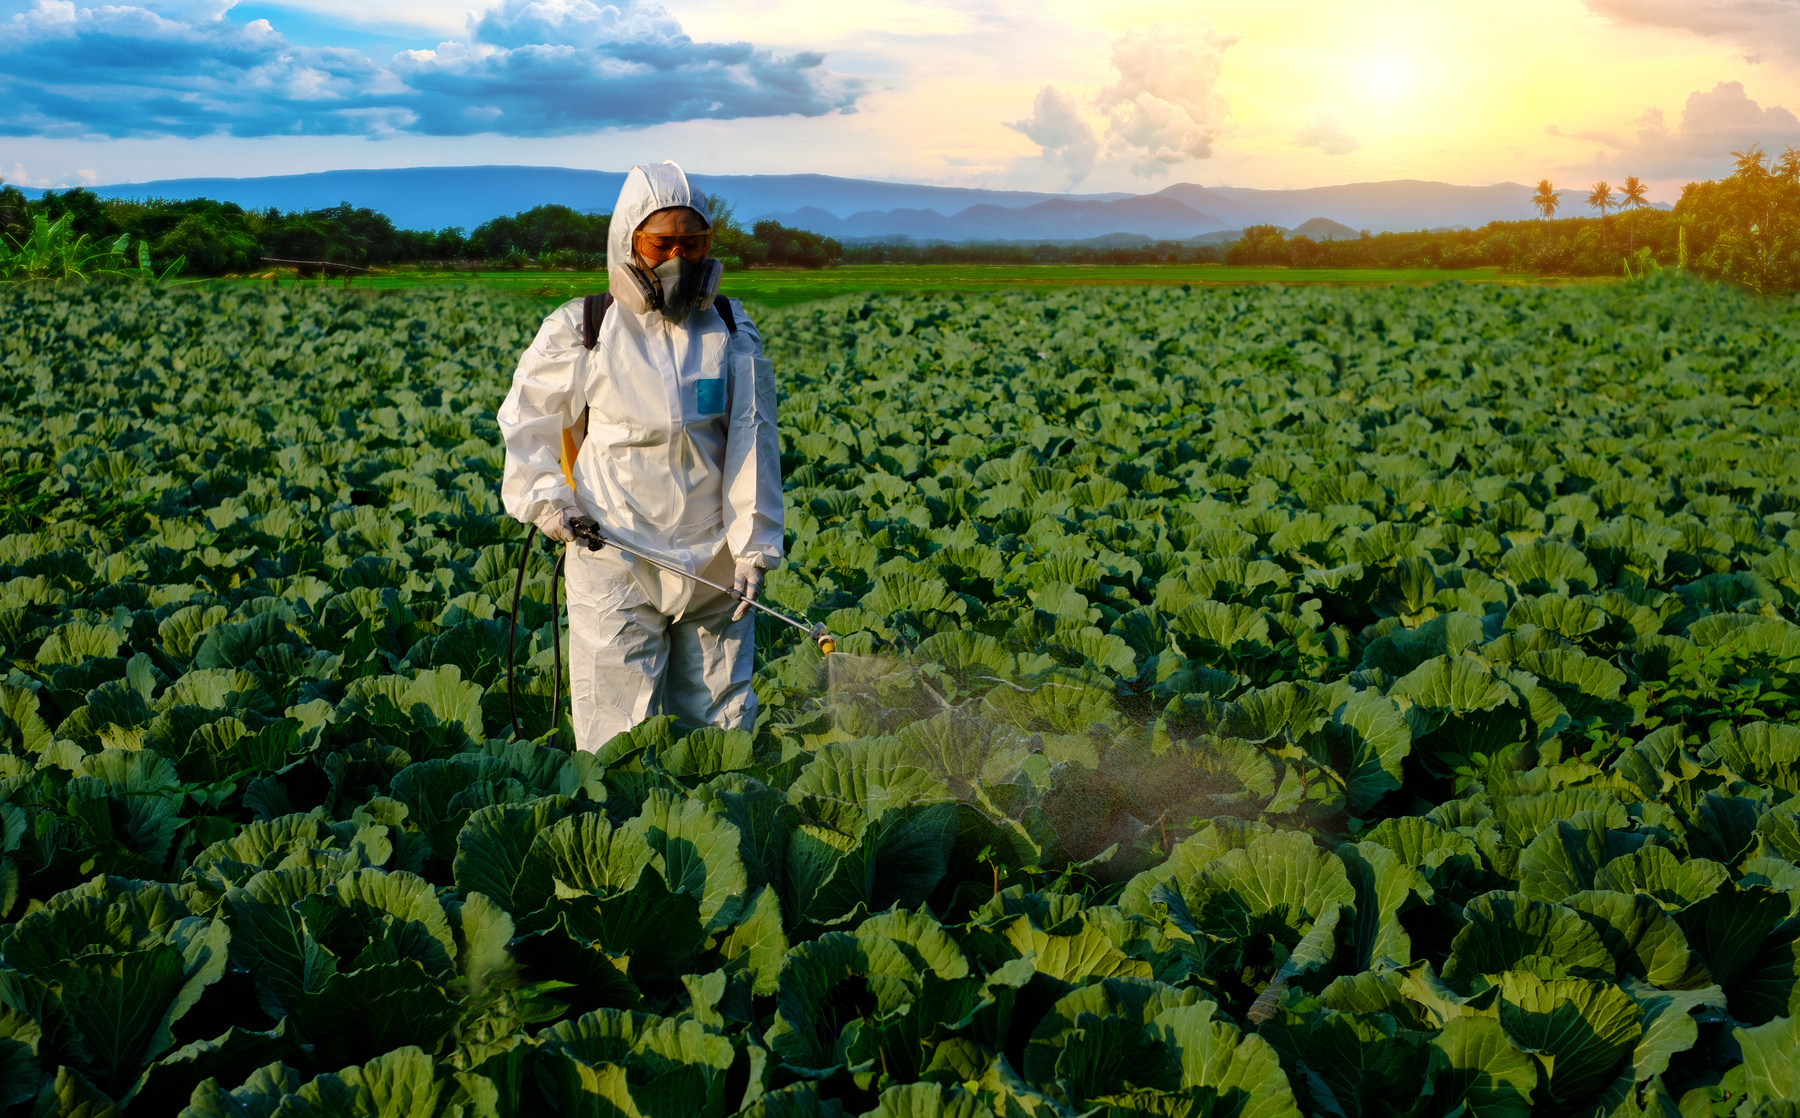 Farmer in Protective Suit Spraying Fertilizer on Crops